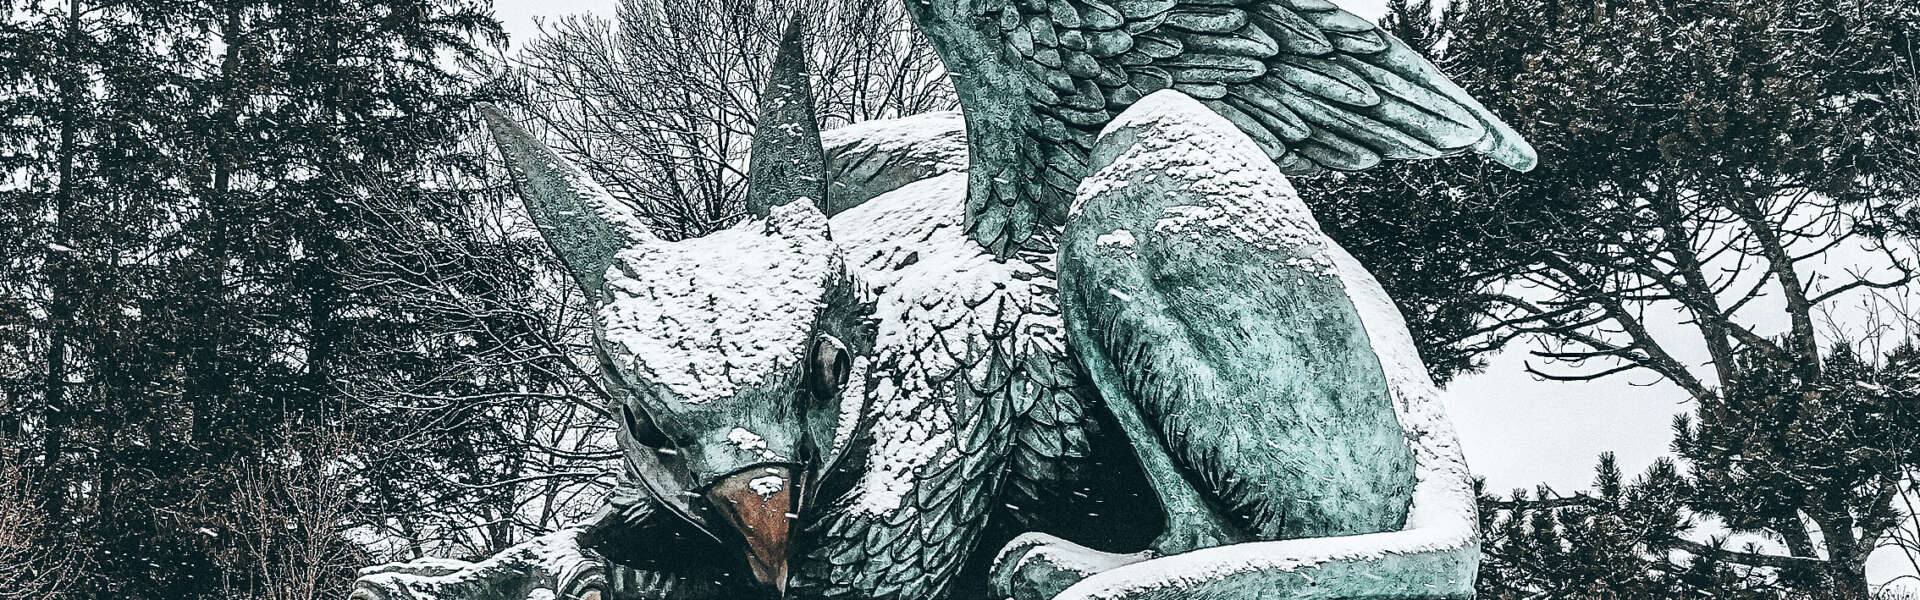 A copper statue of a gryphon covered in snow in front of trees.